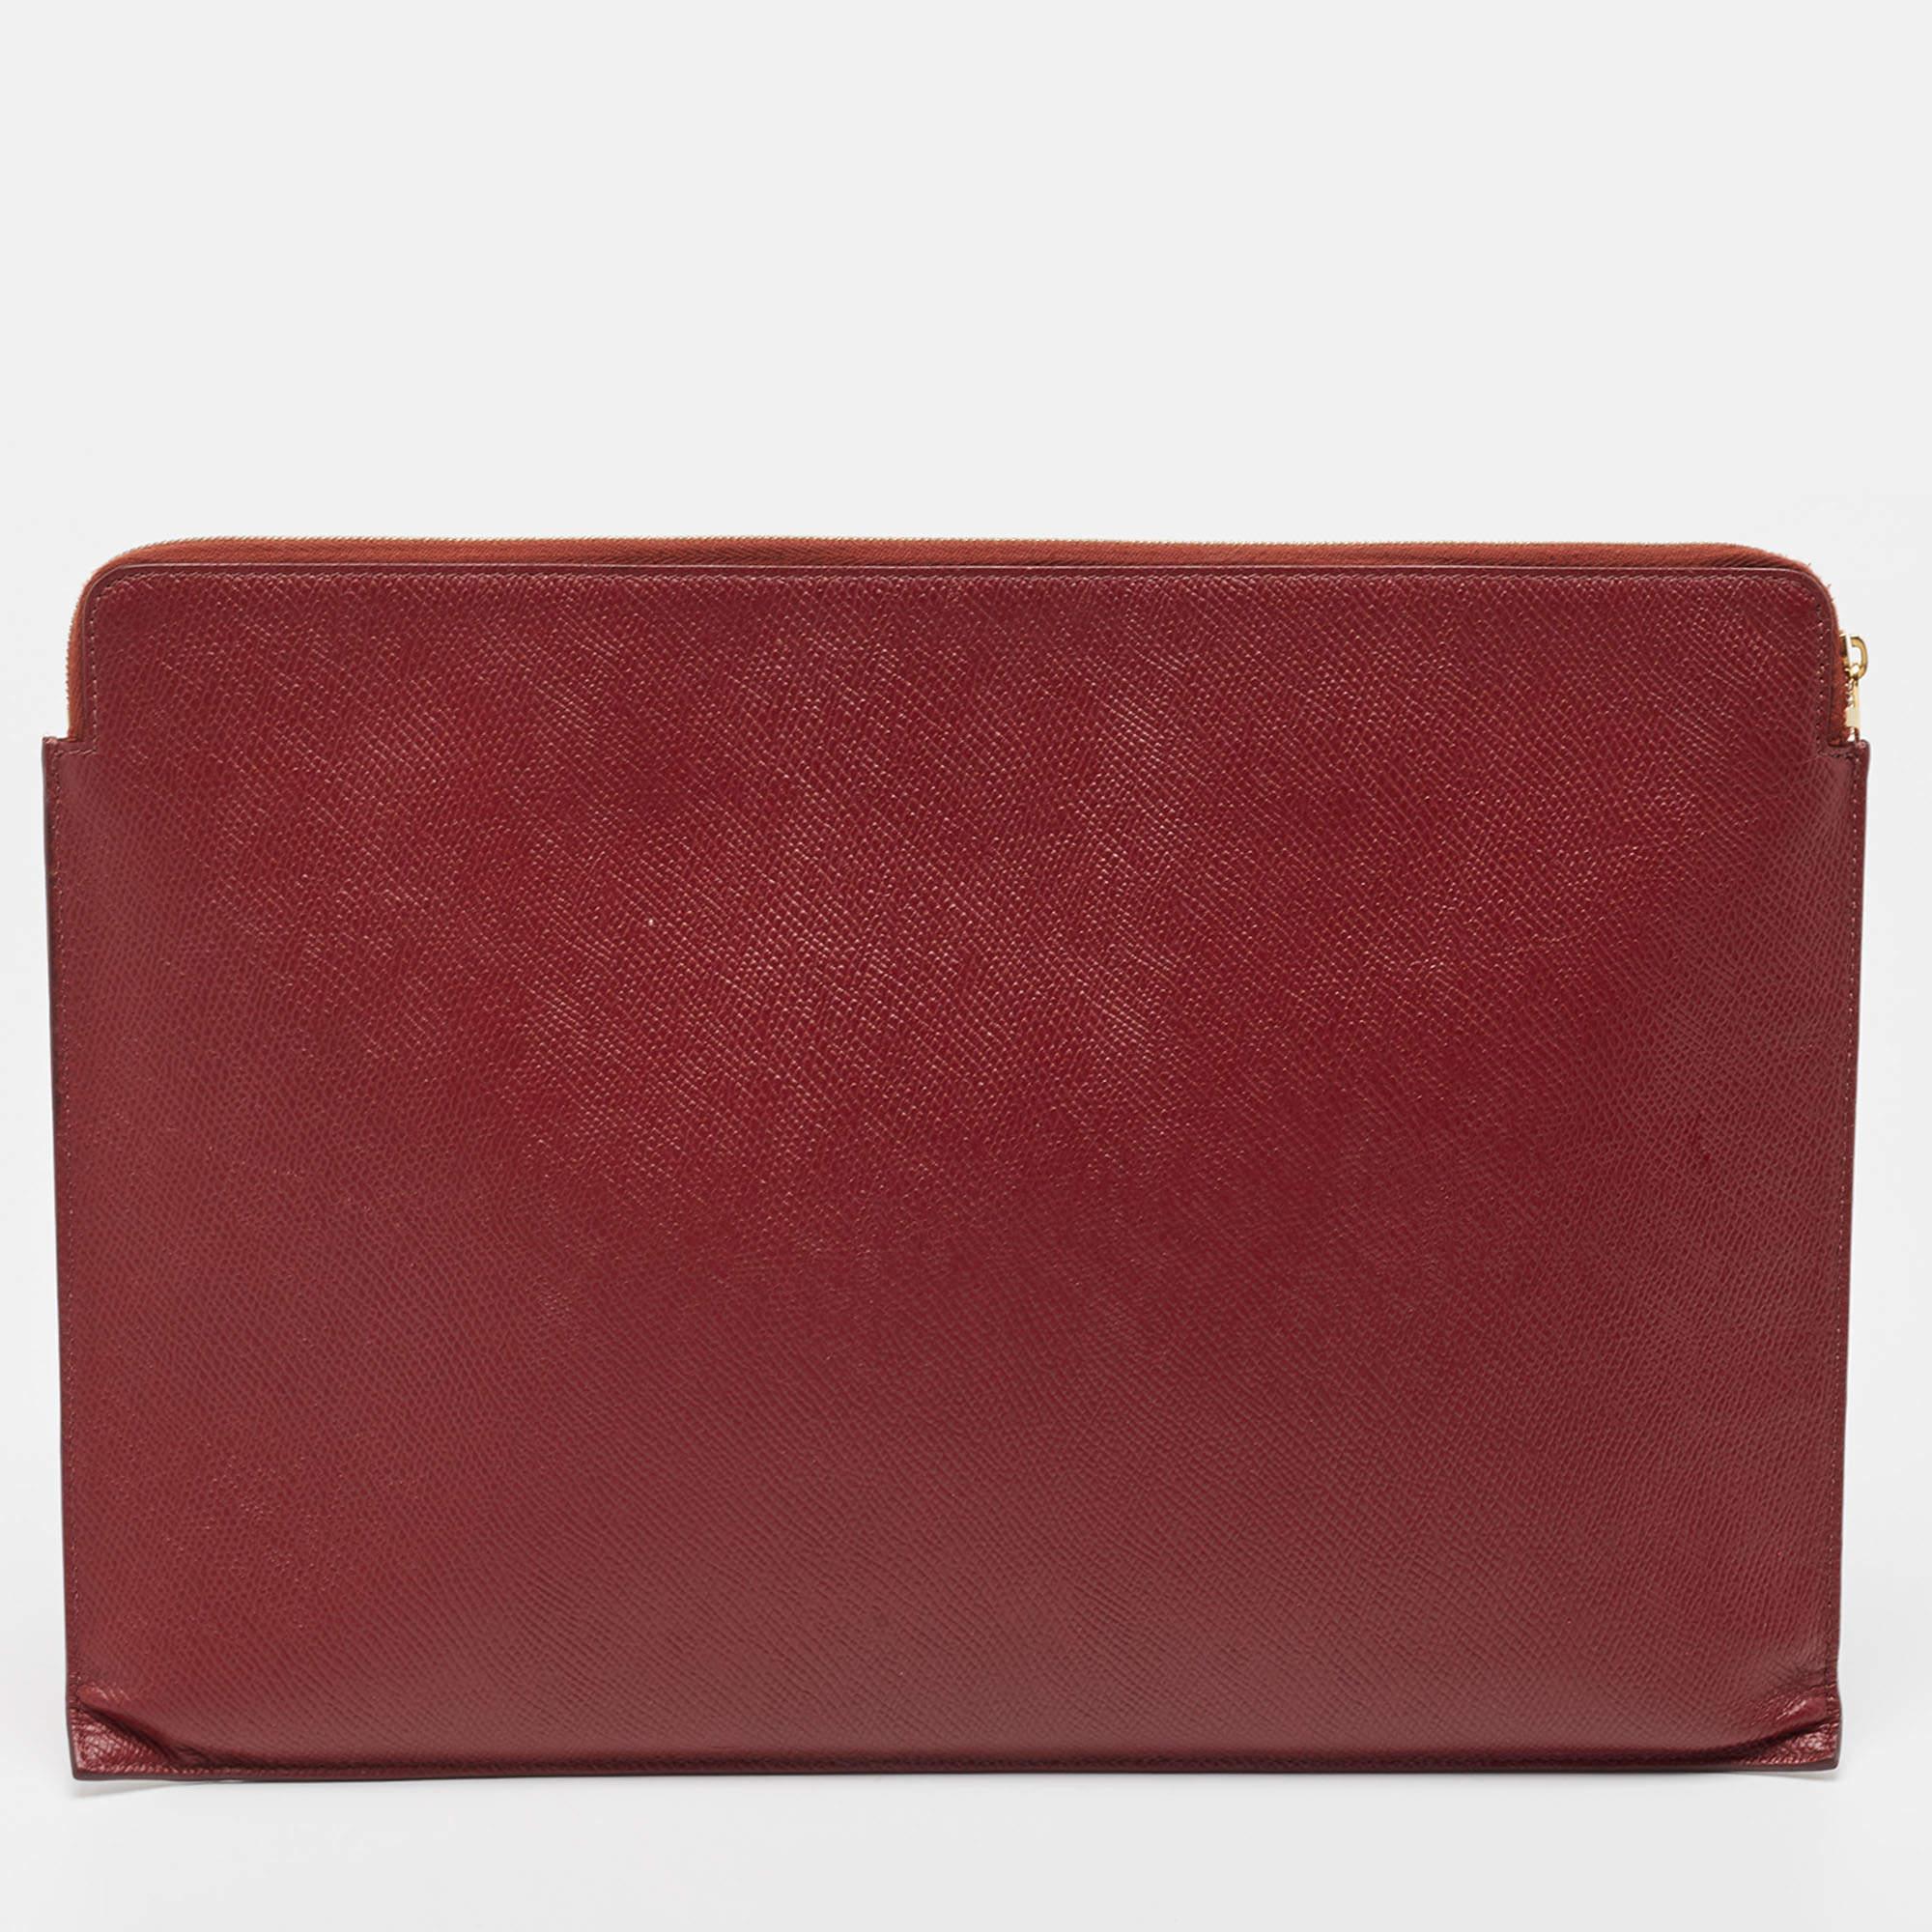 Celine Red Leather Zip Pouch 2